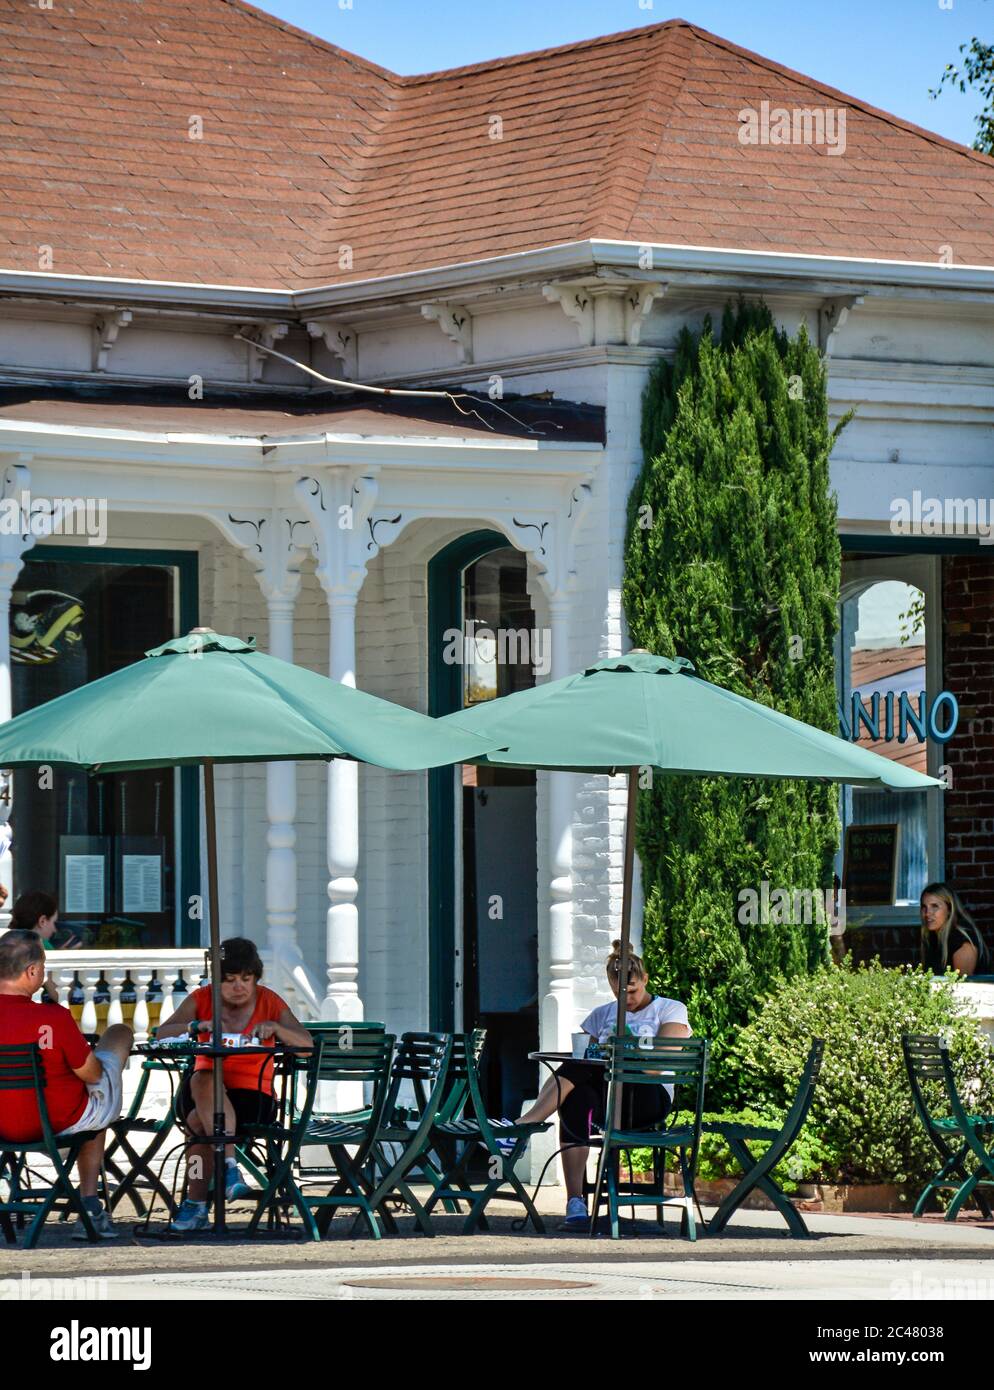 People enjoy sitting outside on the patio at the Panino restaurant in an old Victorian house, downtown Santa Barbra, CA, USA Stock Photo